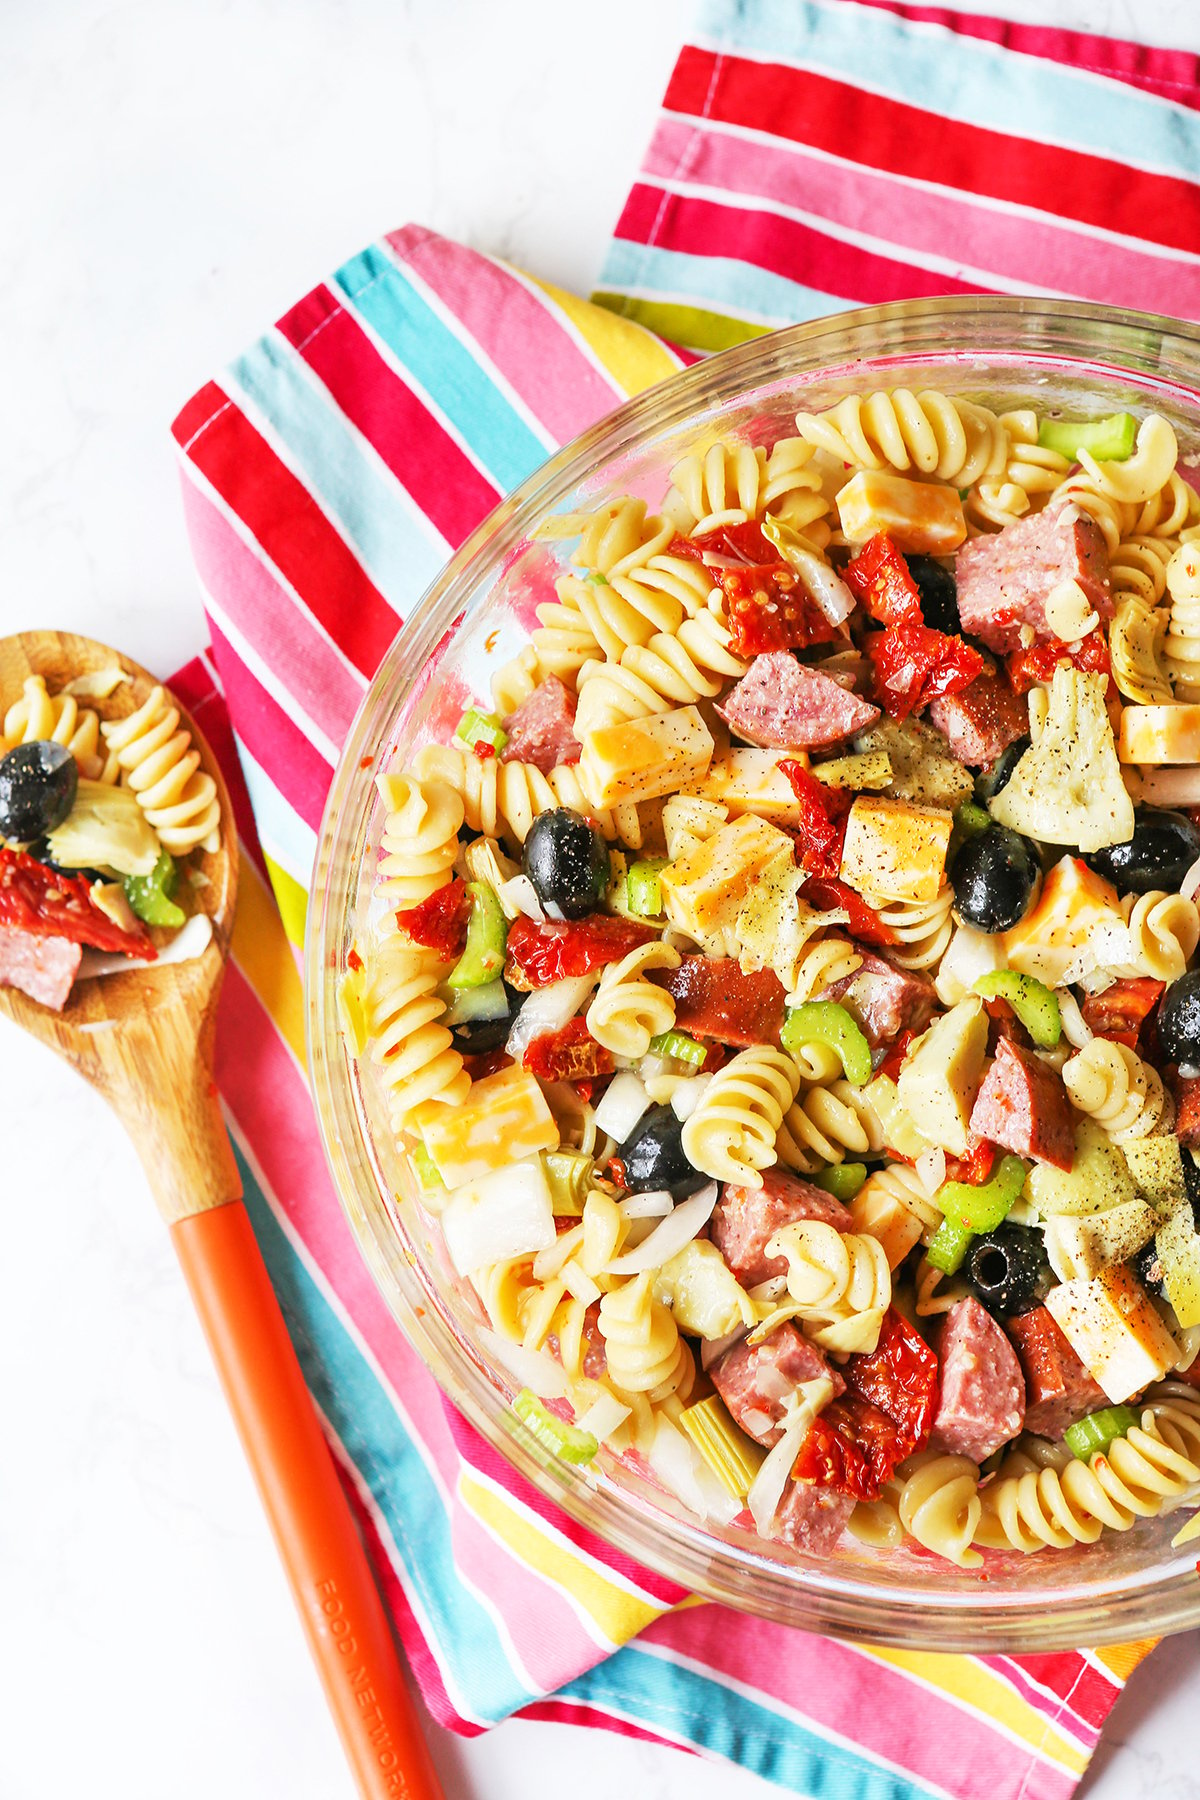 Top view of a bowl of pasta salad with a wooden spoon nearby.